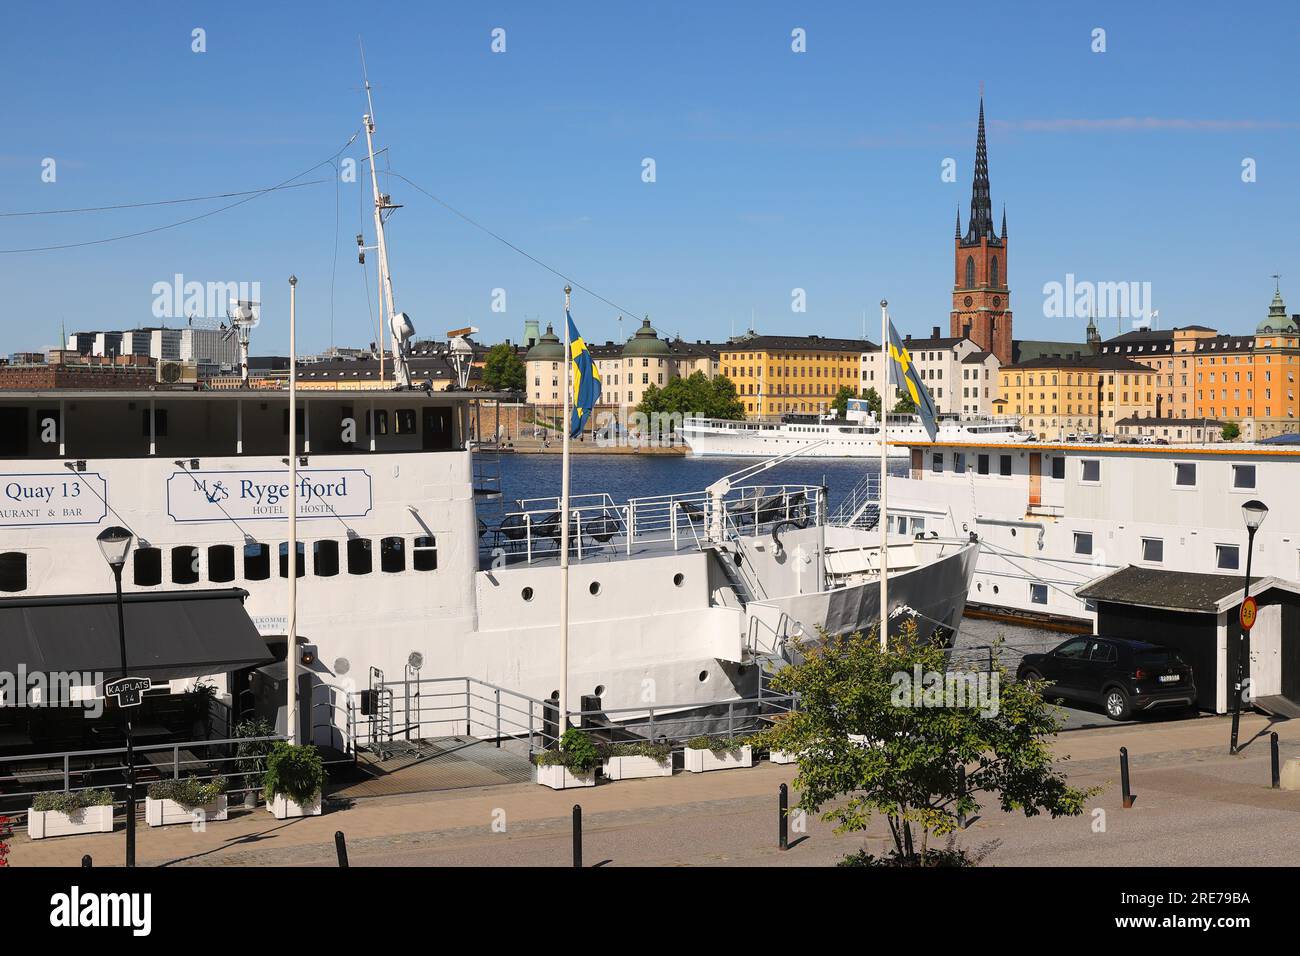 Stockholm, Sweden - July 24, 2023: The Rygerfjord hotel and hostel ship at the Sodermalarstrand with Riddarholmen island in the background. Stock Photo